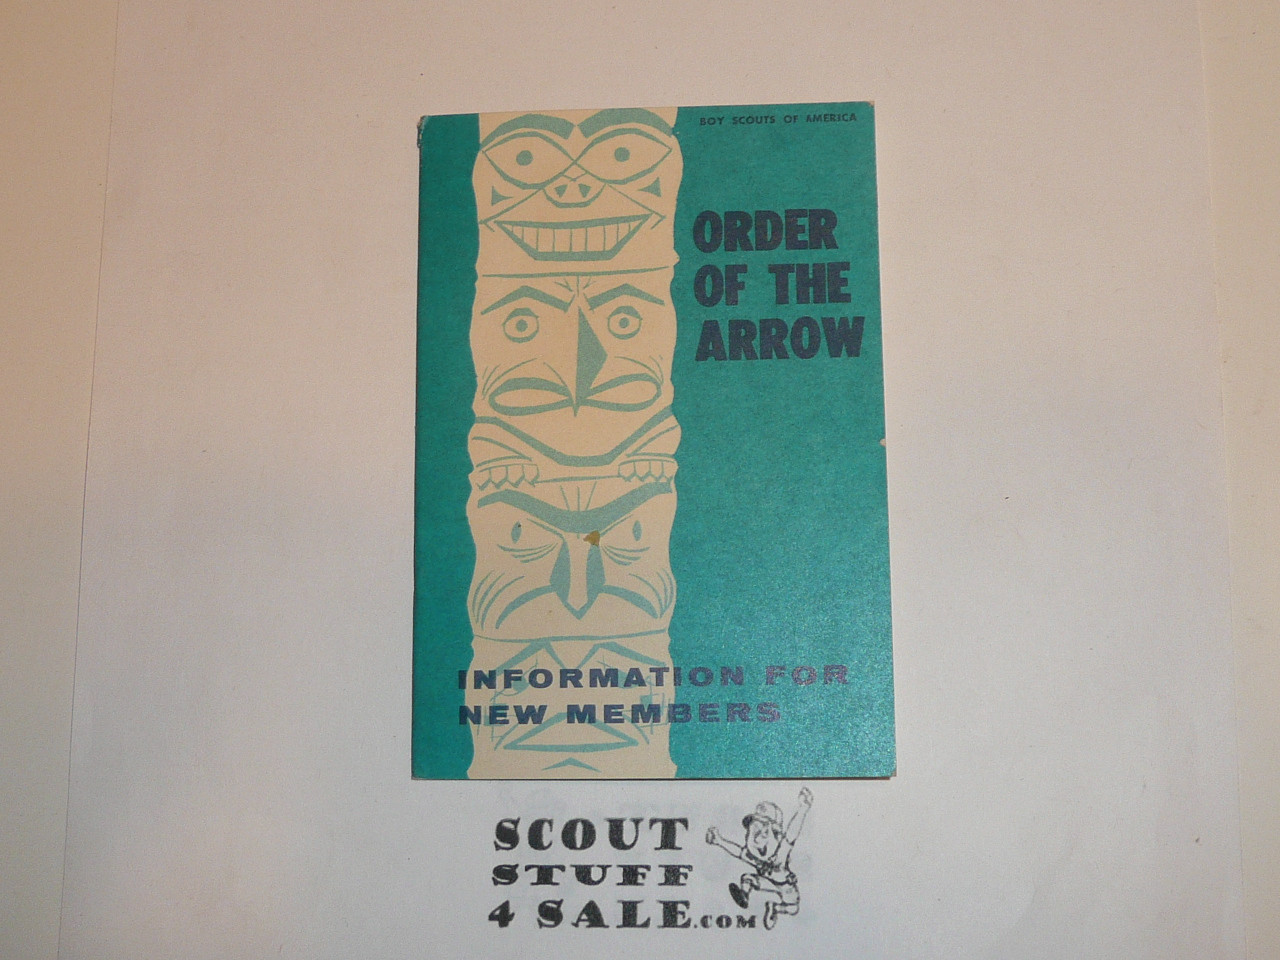 Order of the Arrow Information For New Members, 1968, 10-69 Printing